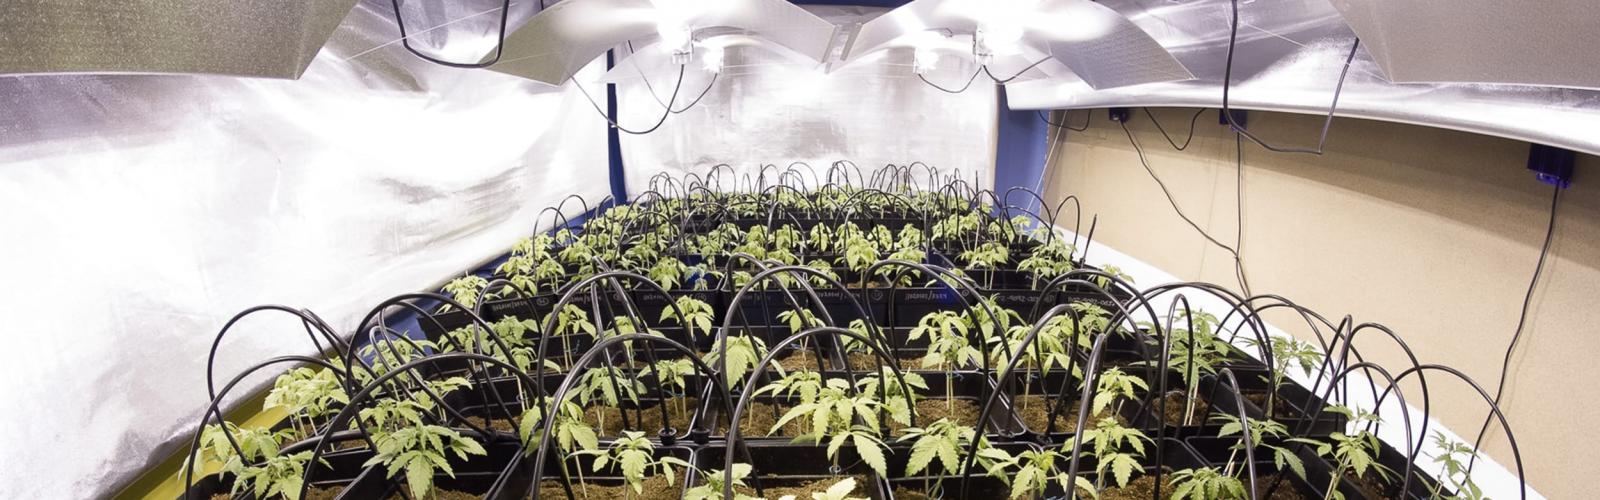 Growing Products by Advanced Hydroponics